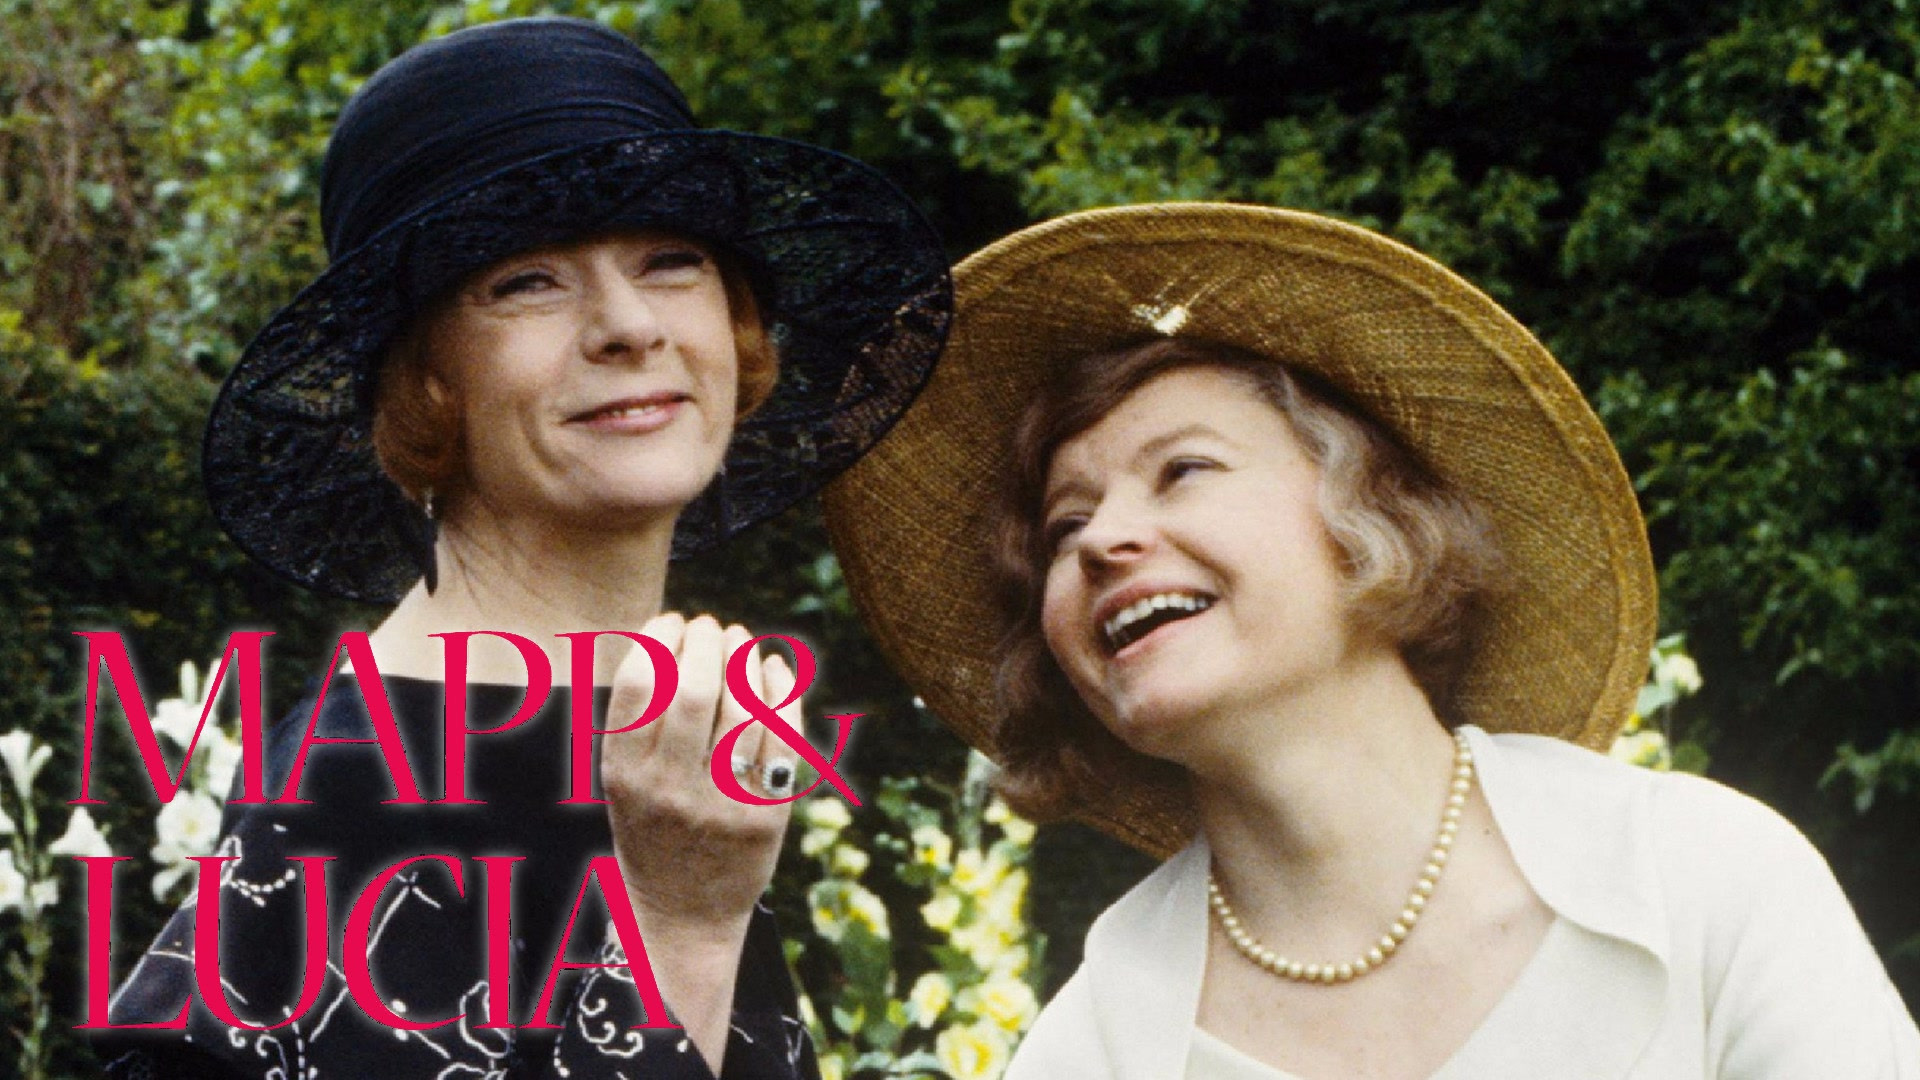 Show Mapp and Lucia (1985)